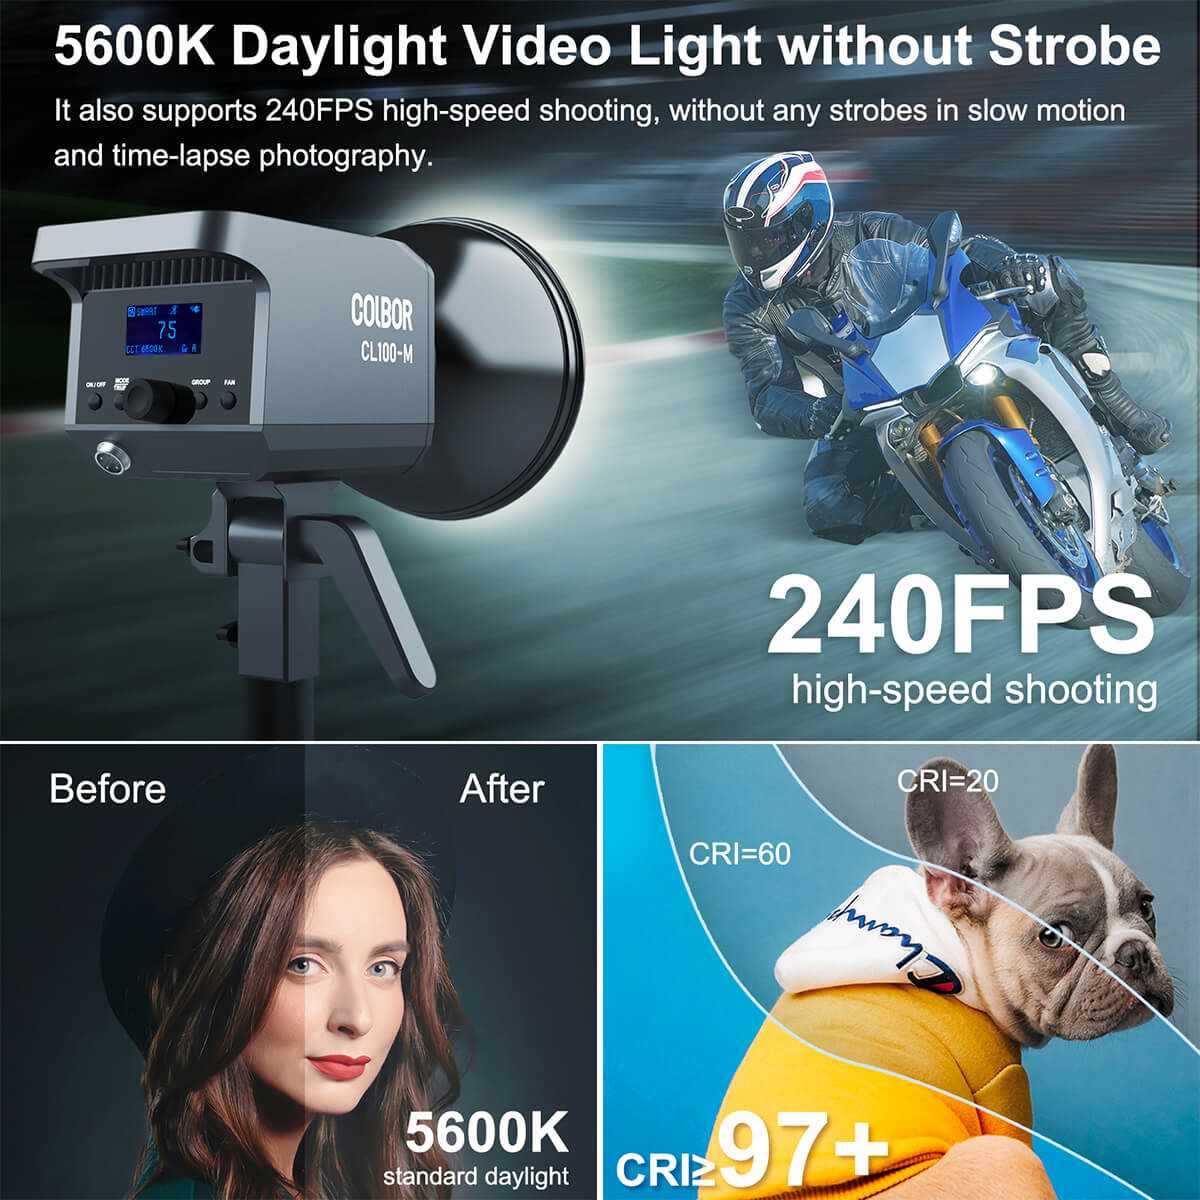 COLBOR CL100M is a 5600K video light without any strobe in slow motion and time-lapse photography